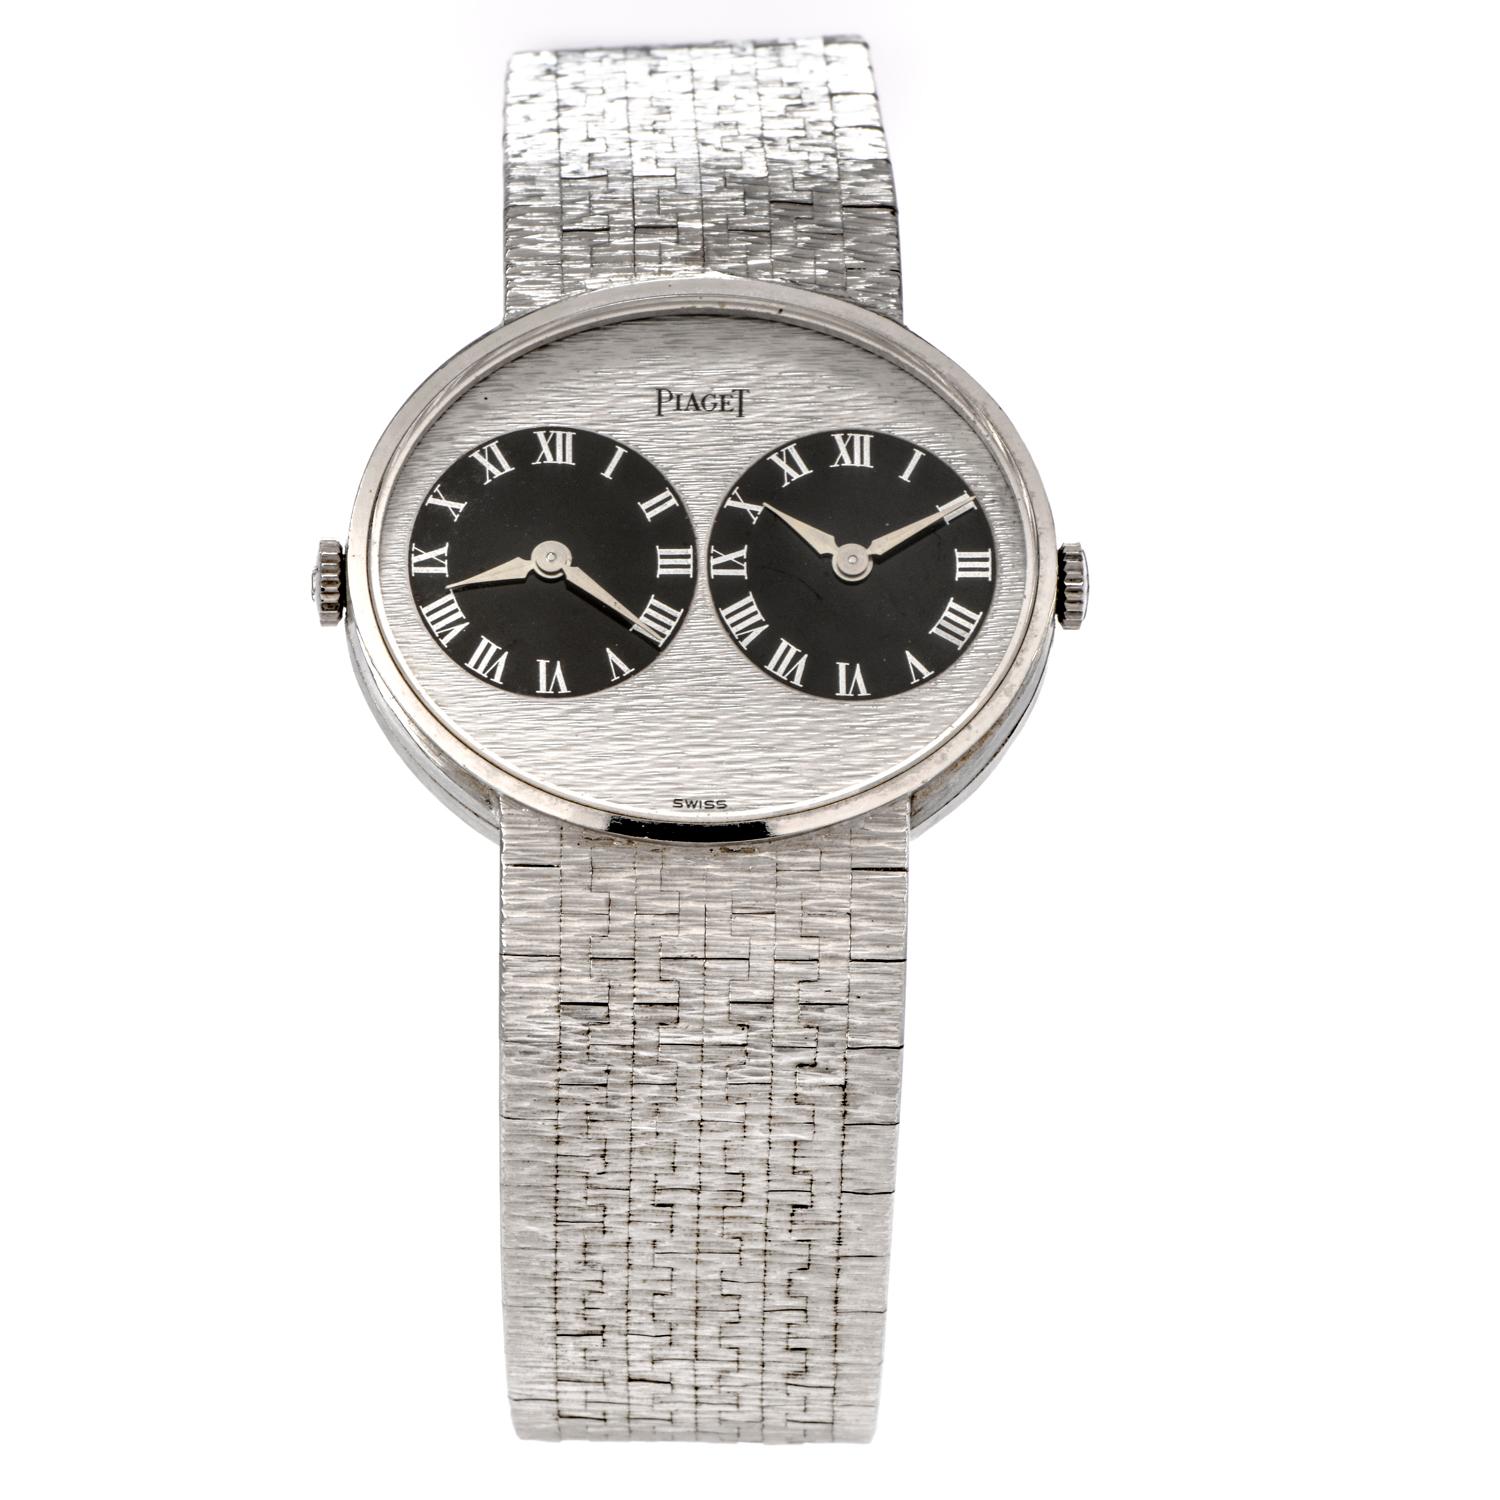 Admire this unique Vintage Piaget 18K White Gold two zone Textured Watch! 

This collectable 1970's  watch is crafted in 18 karat textured  white gold and purity marked.

The over sized  watch with oval case is  featuring two black dial clocks side